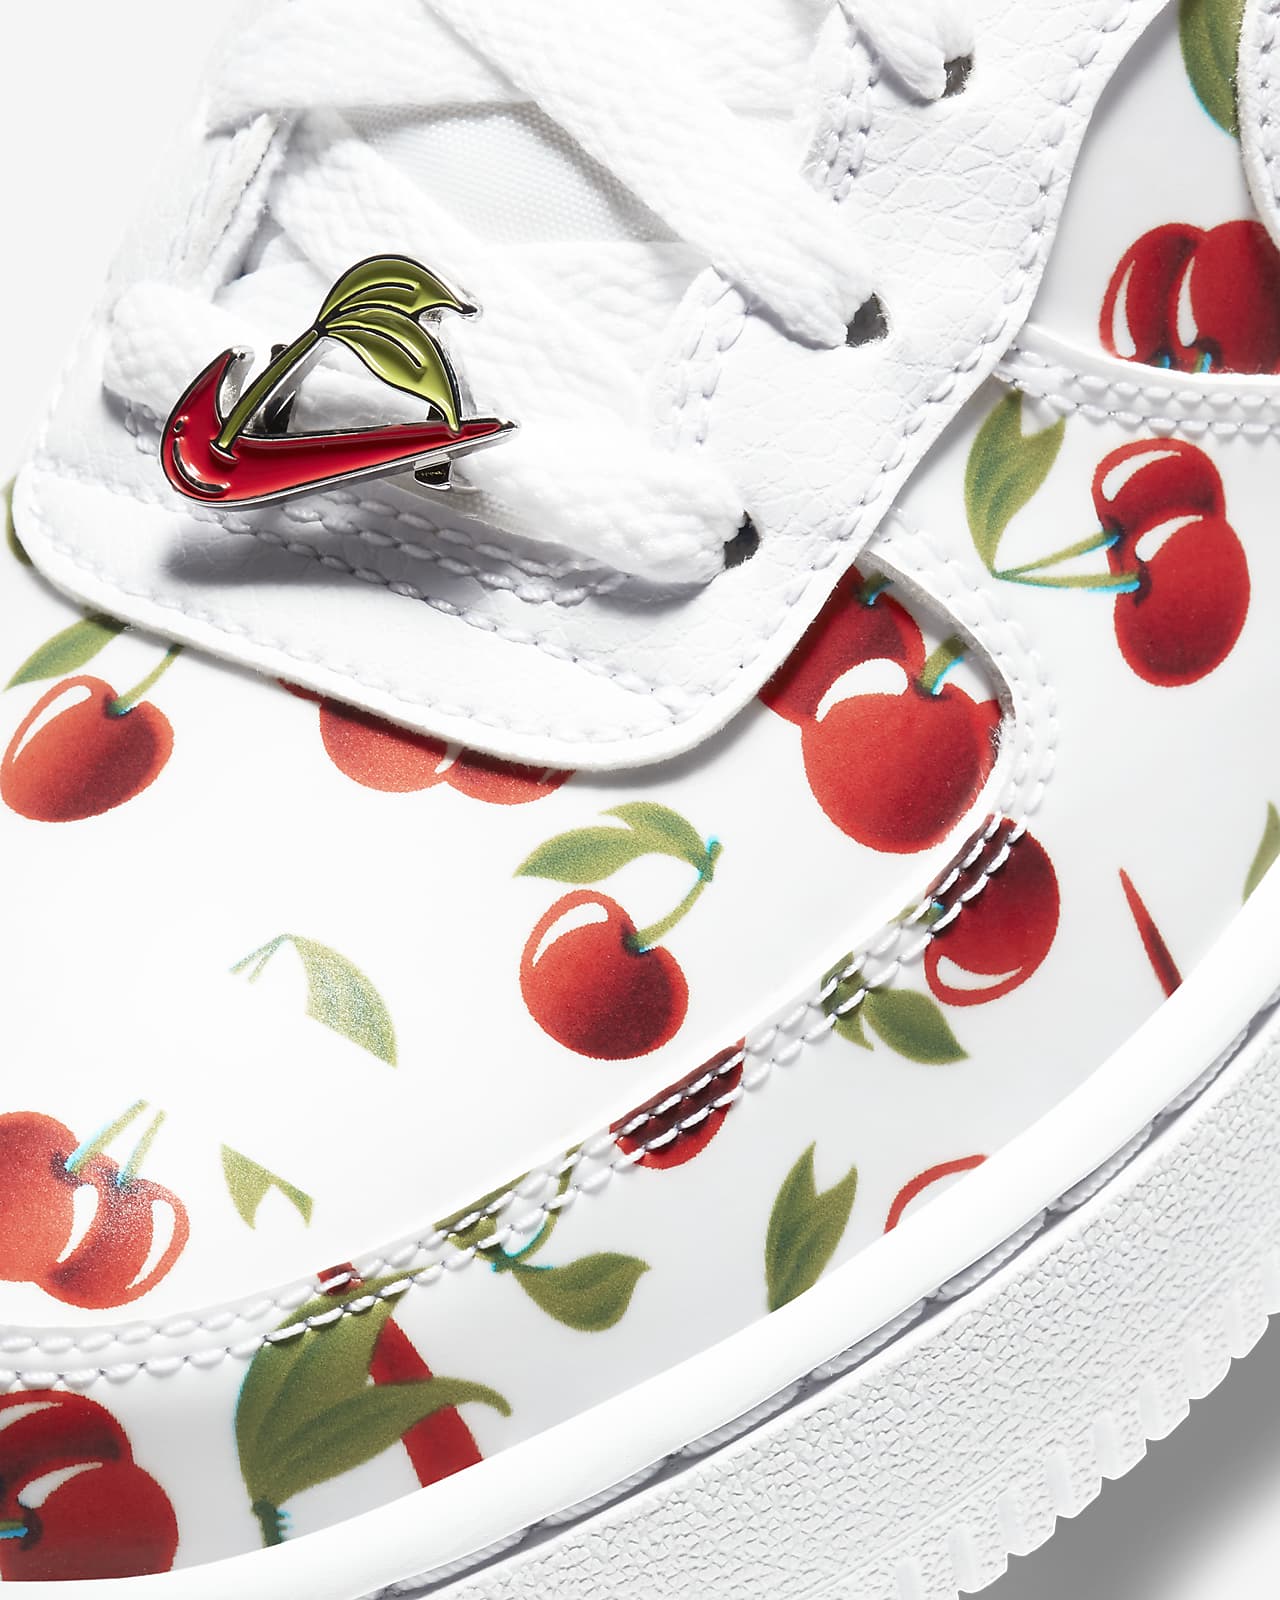 nikes with cherries